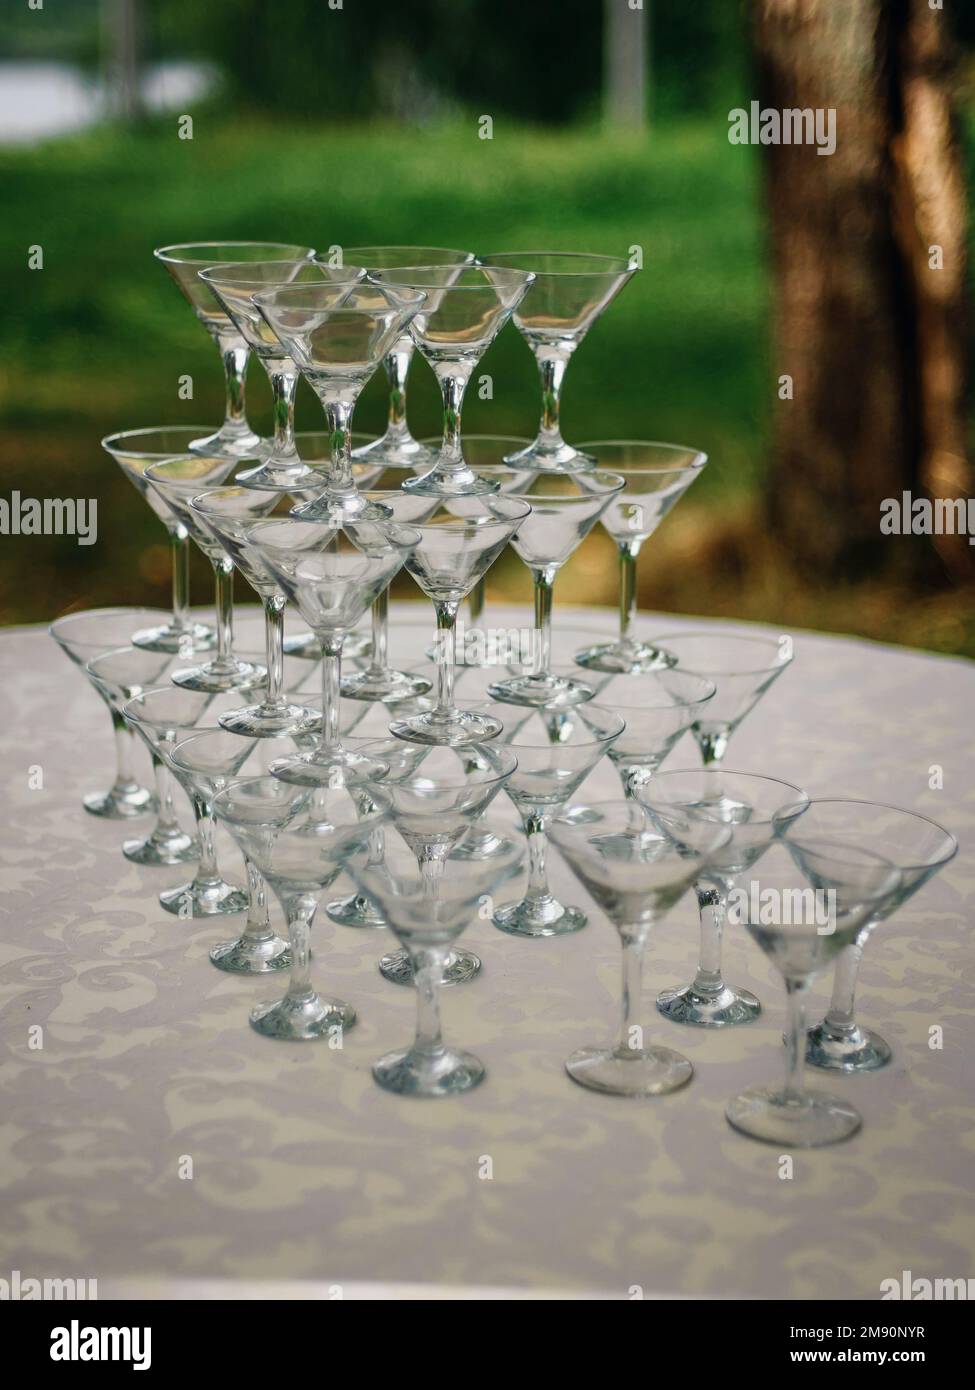 https://c8.alamy.com/comp/2M90NYR/pyramid-of-martini-glasses-on-the-table-for-a-festive-reception-2M90NYR.jpg